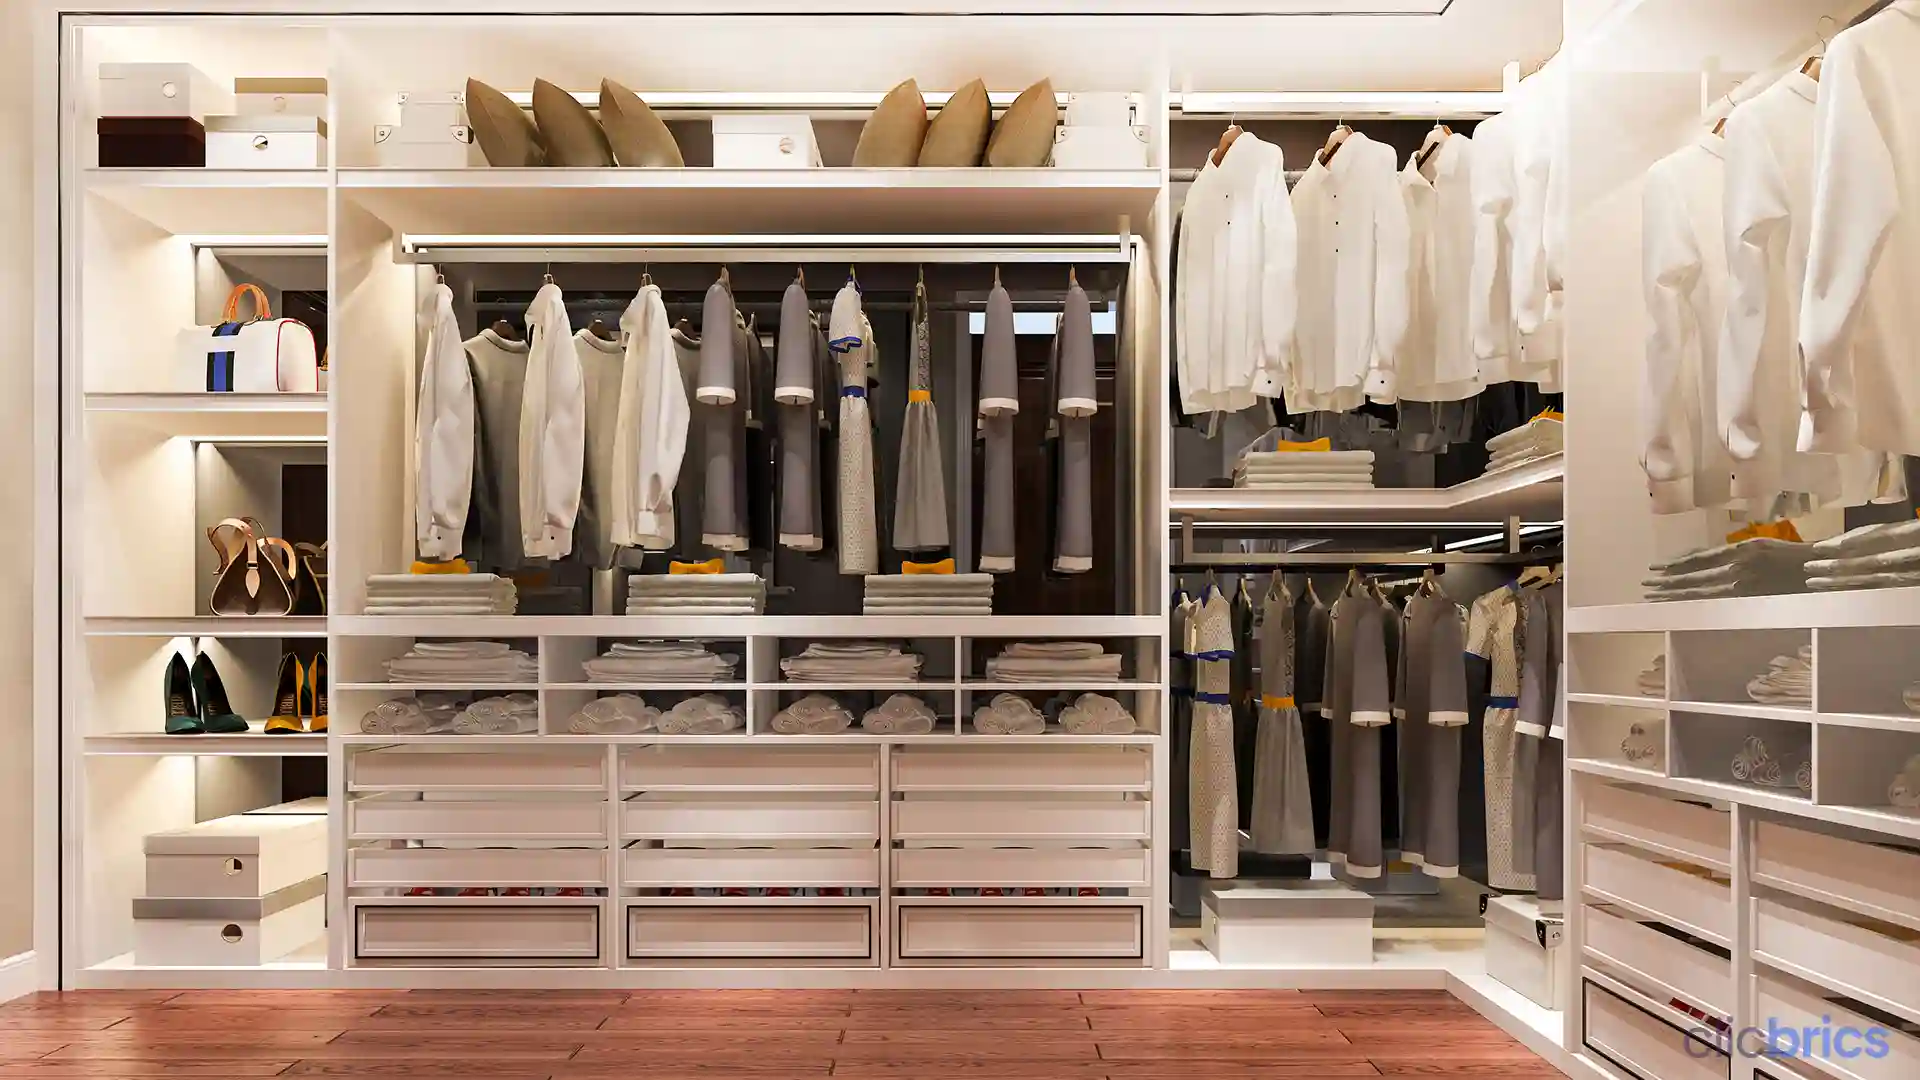 14 Must See Wardrobe Designs for Your Dressing Room | homify